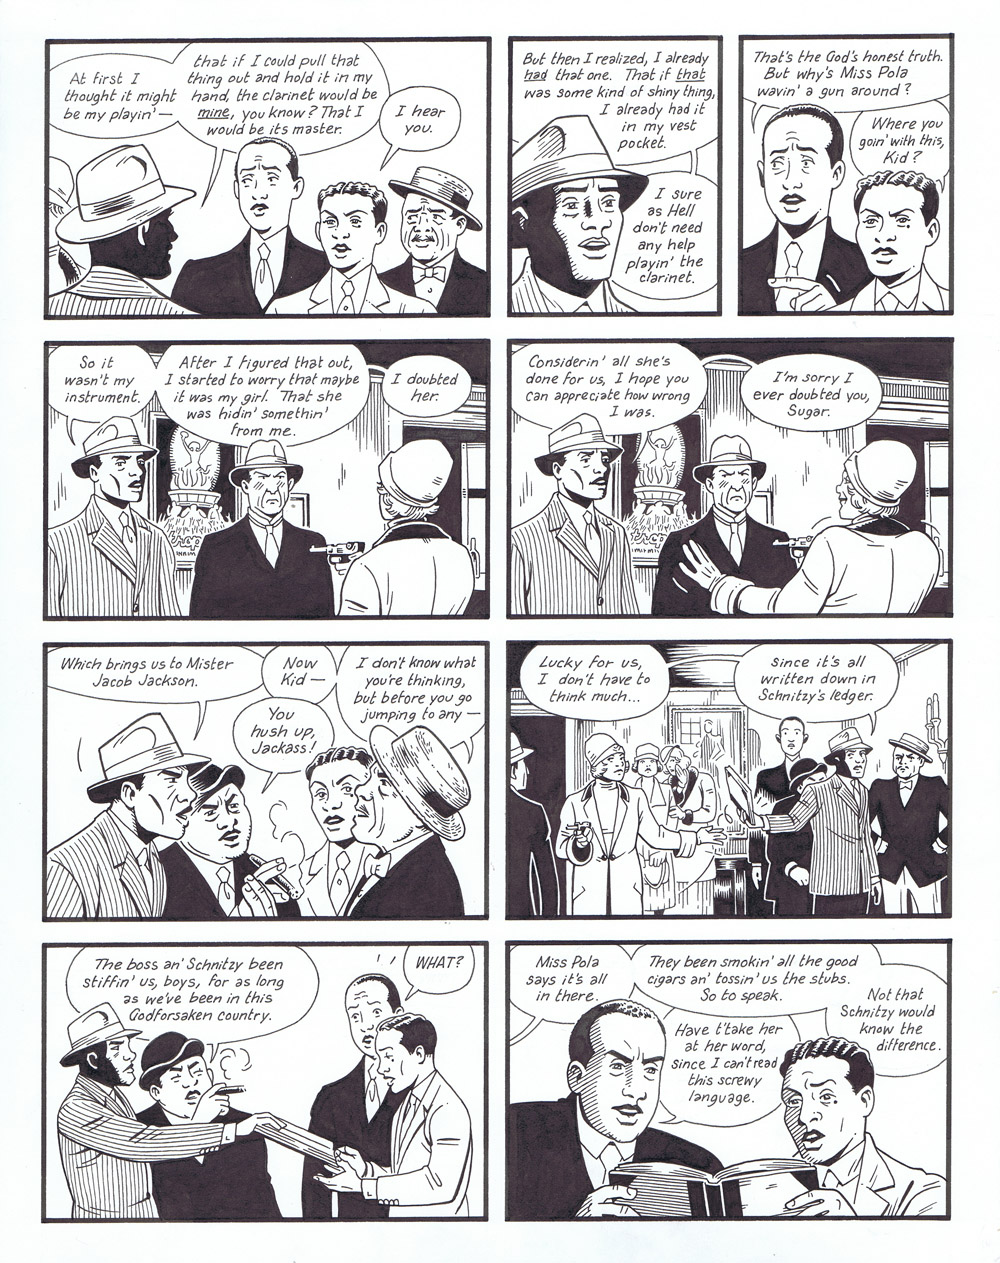 Berlin - page 395 Book Two: City of Smoke - page 201